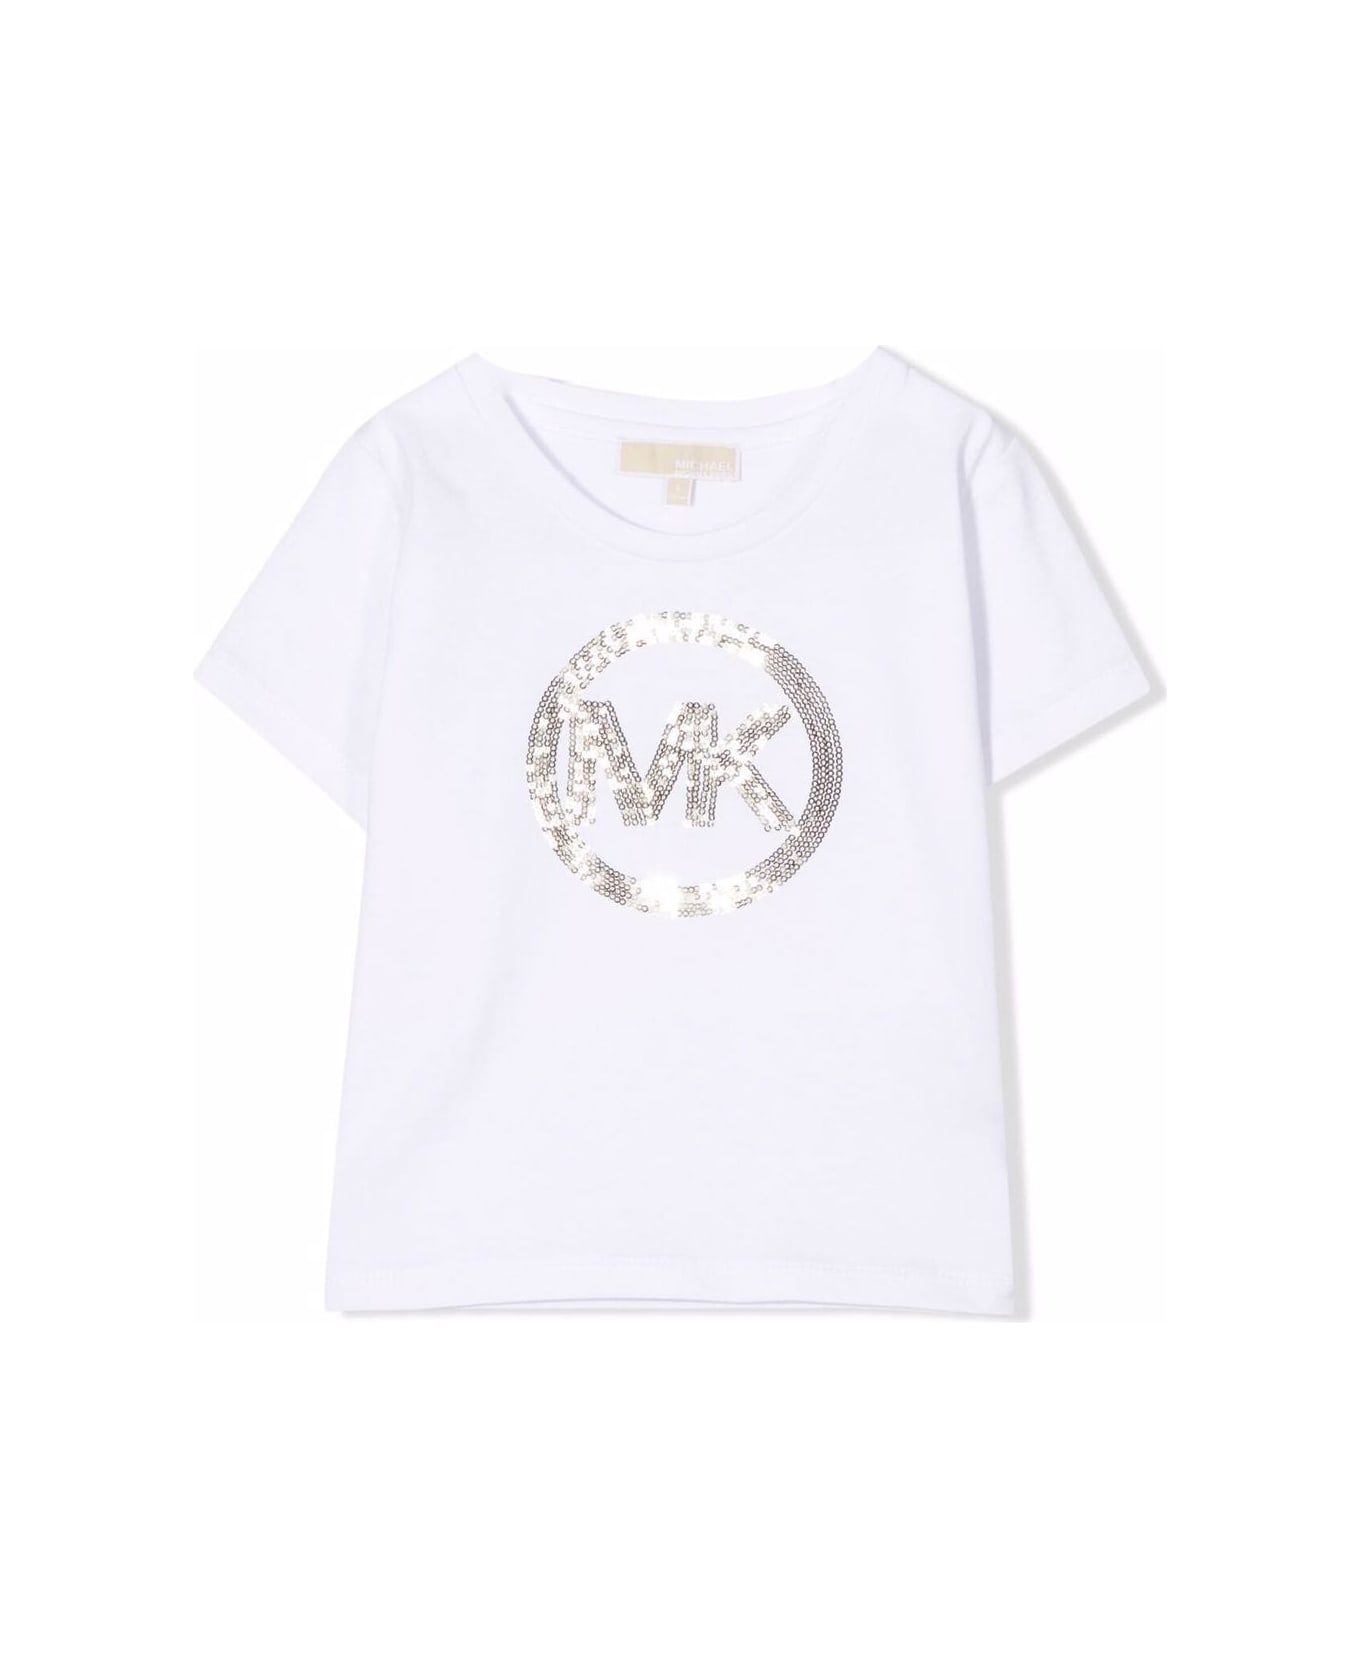 Michael Kors T-shirt With Sequins - WHITE